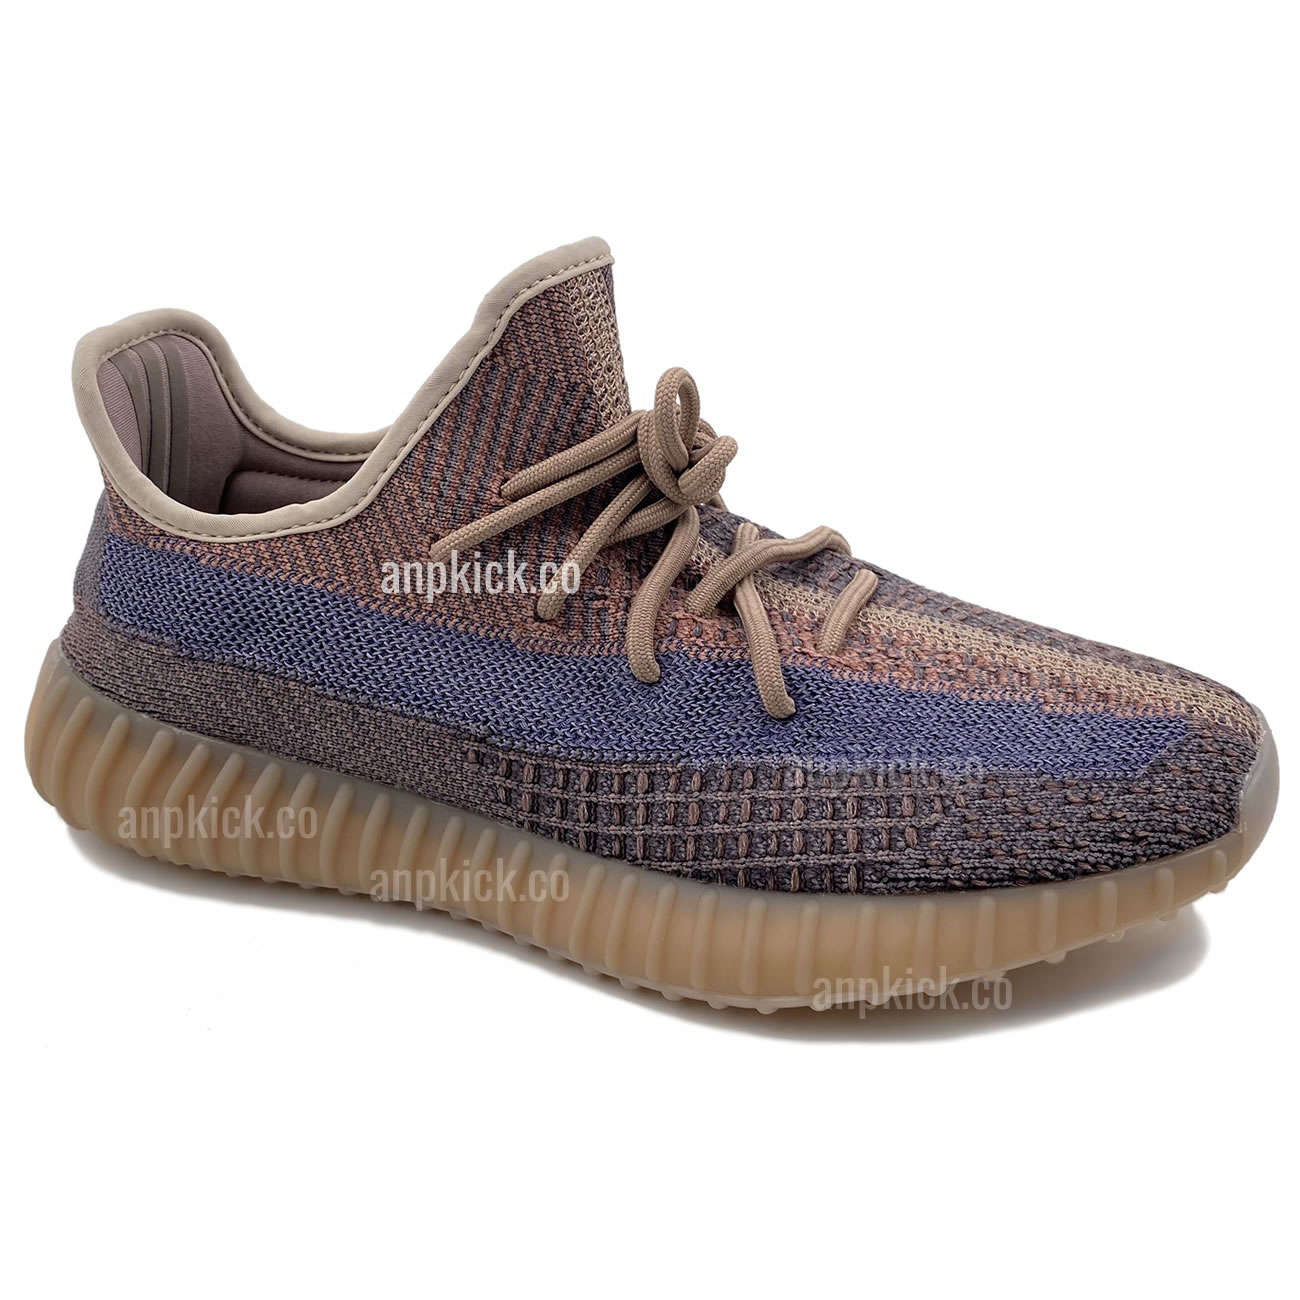 adidas Yeezy Boost 350 V2 "YECHER / Fade" H02795 New Release Date First Look